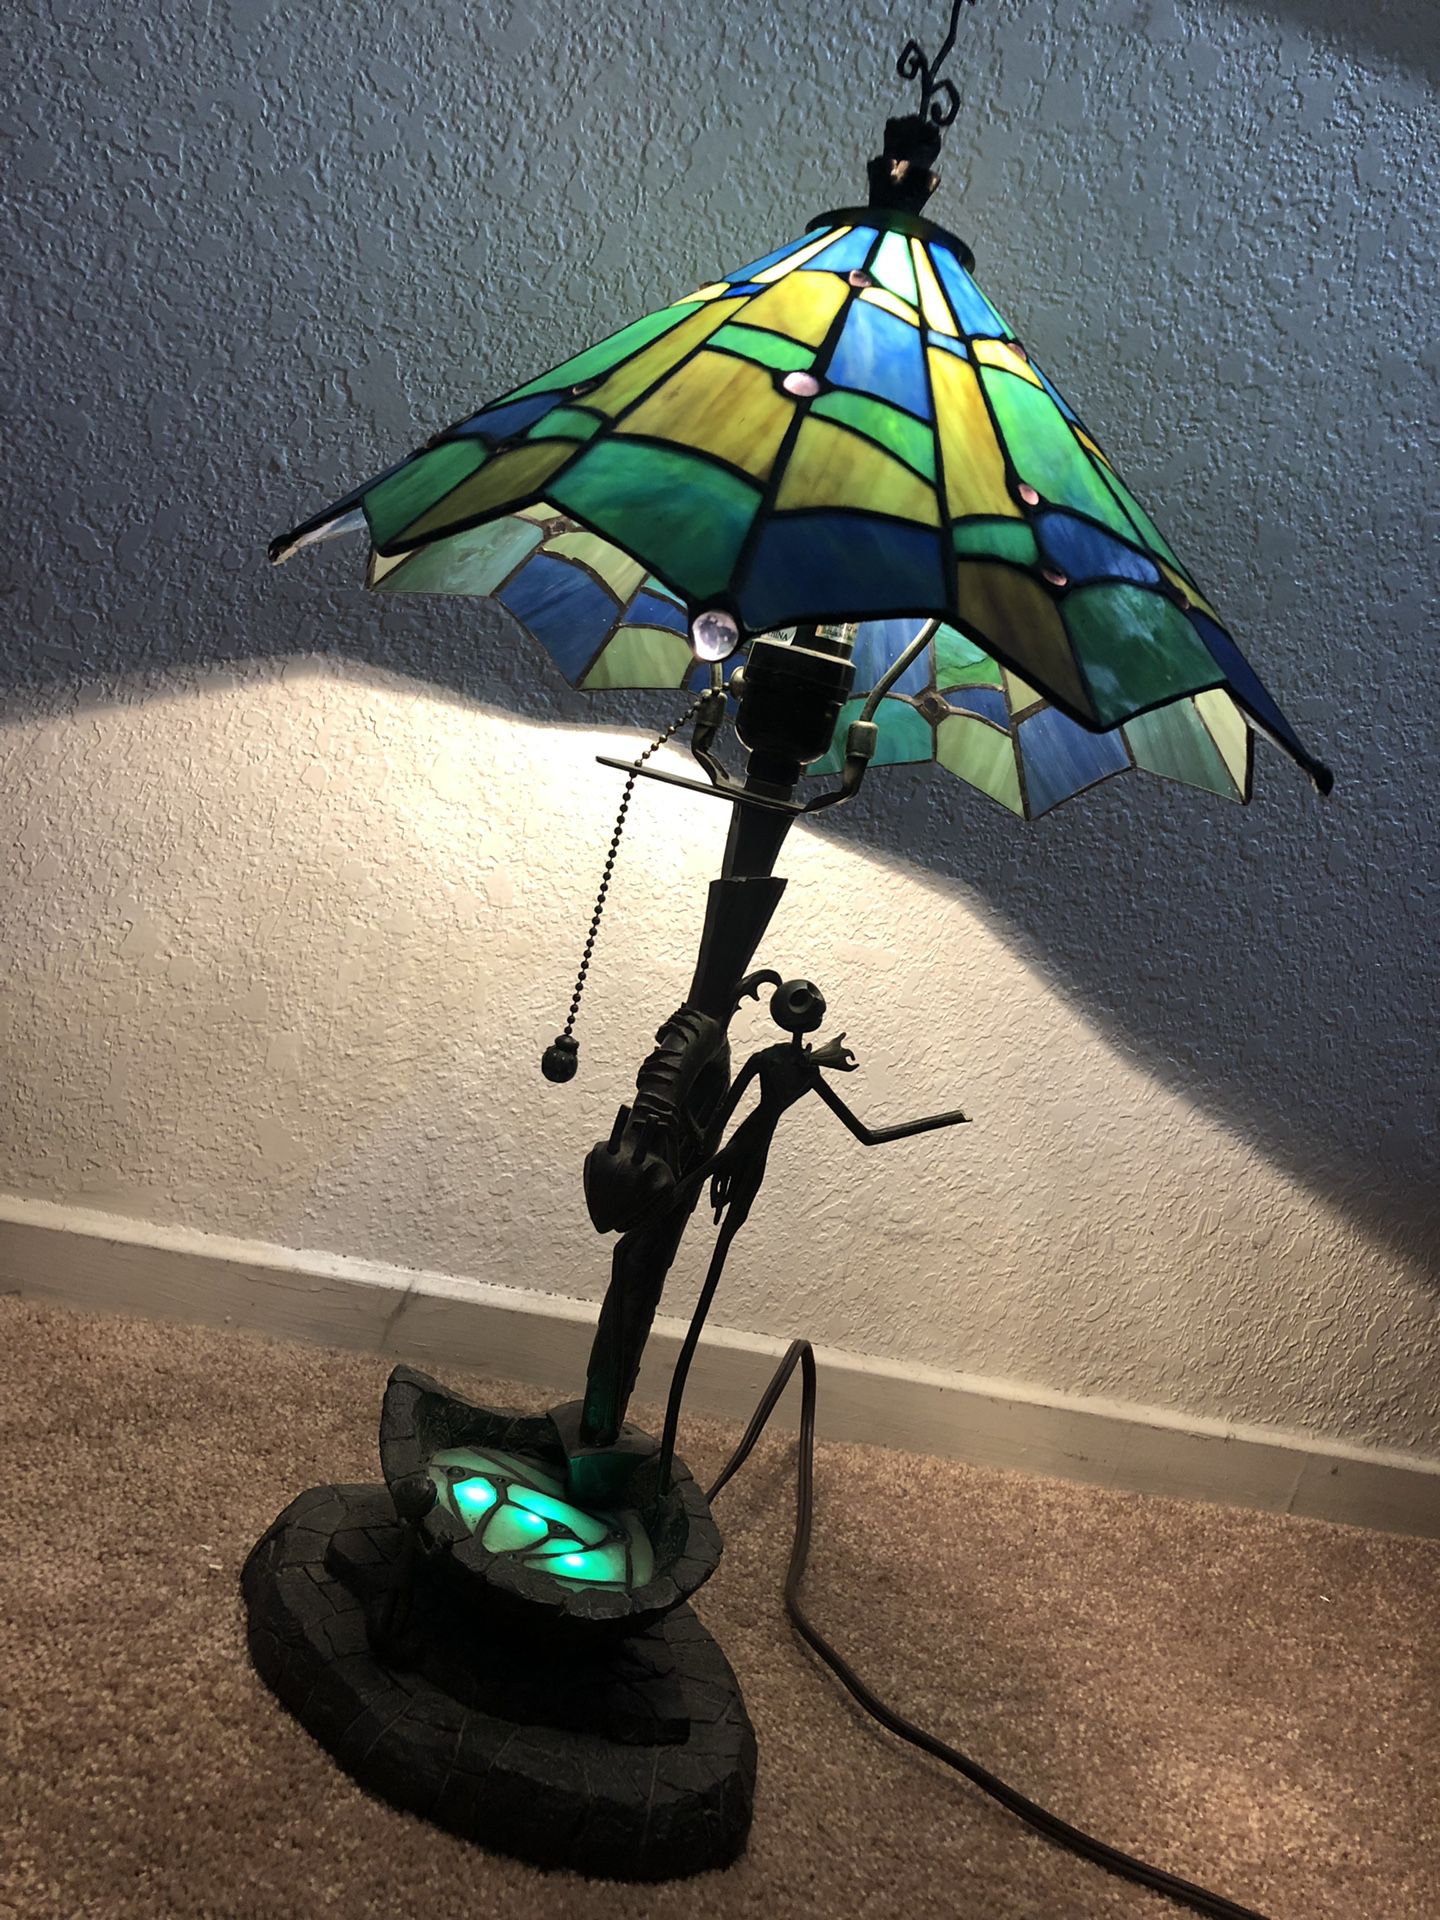 The nightmare before Christmas limited edition Disney Tiffany style lamp